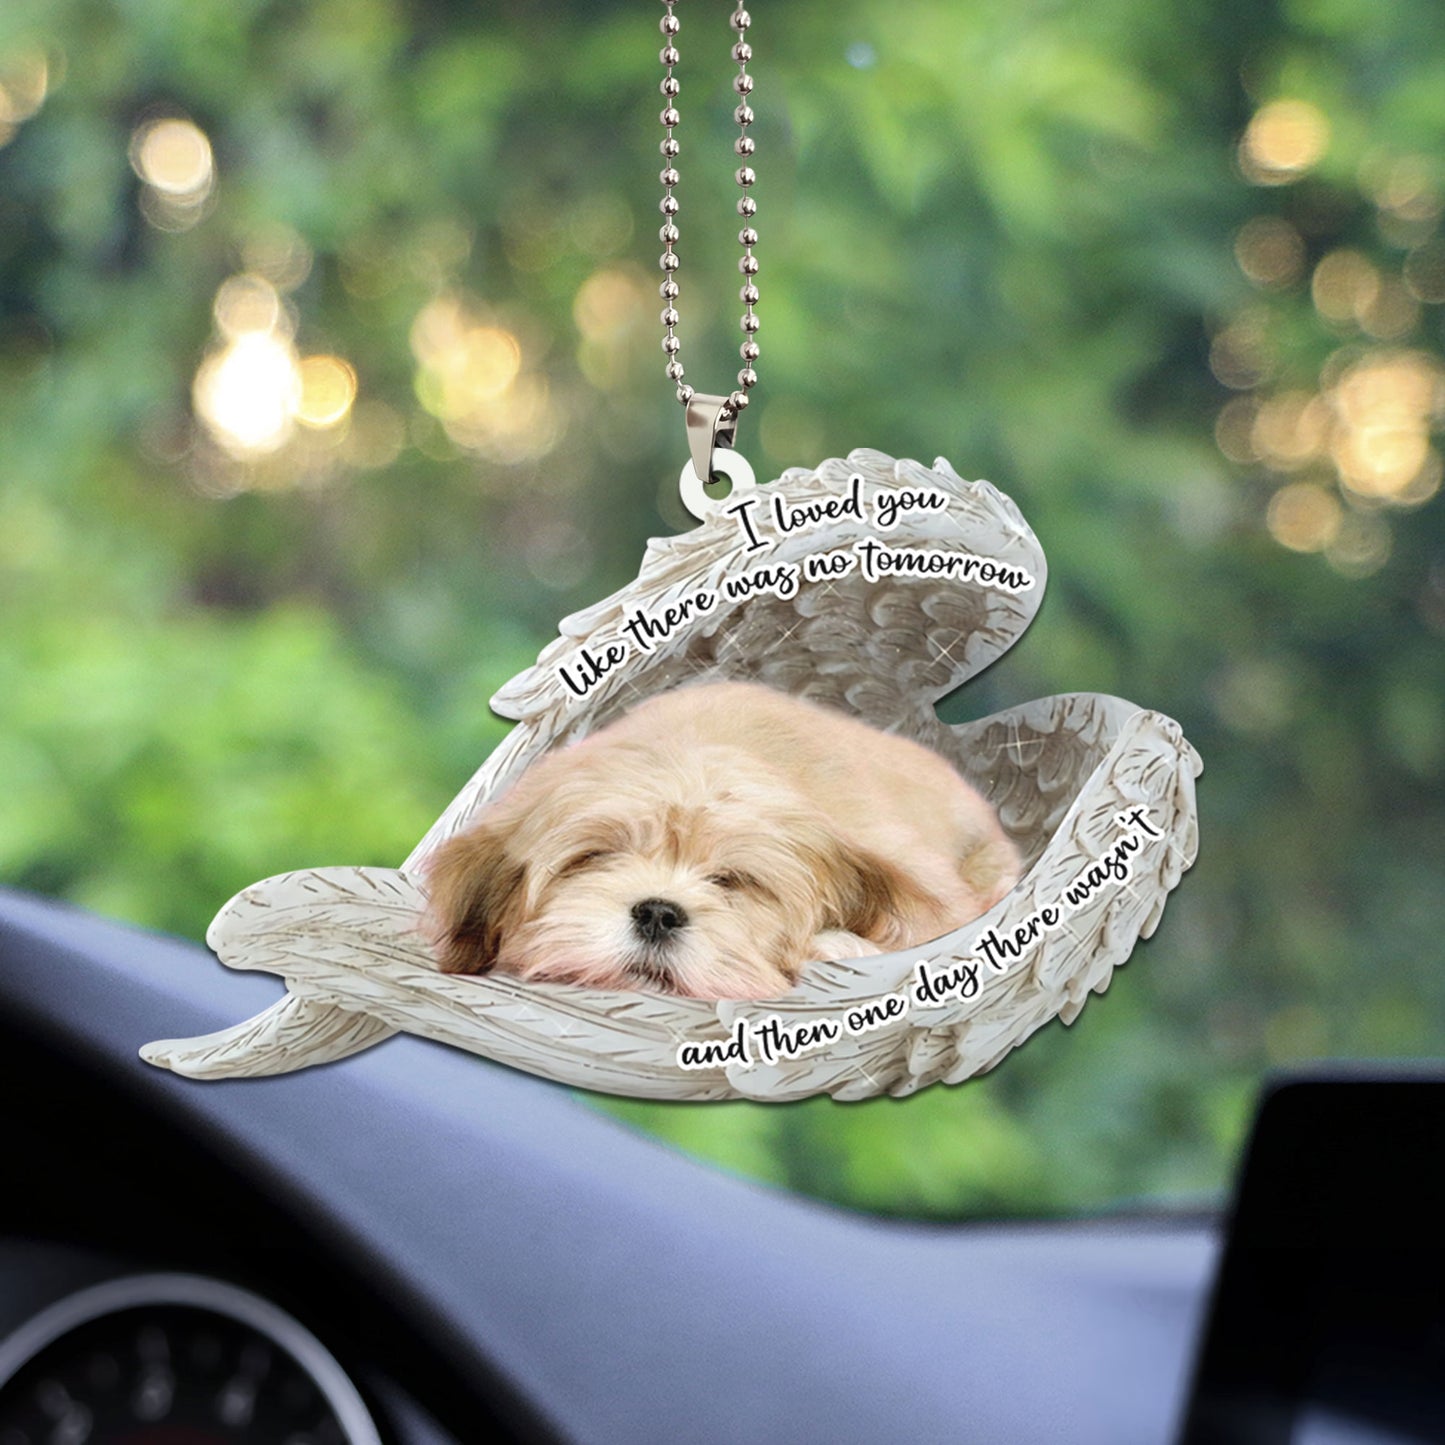 Lhasa Apso Sleeping Angel Personalizedwitch Flat Car Ornament